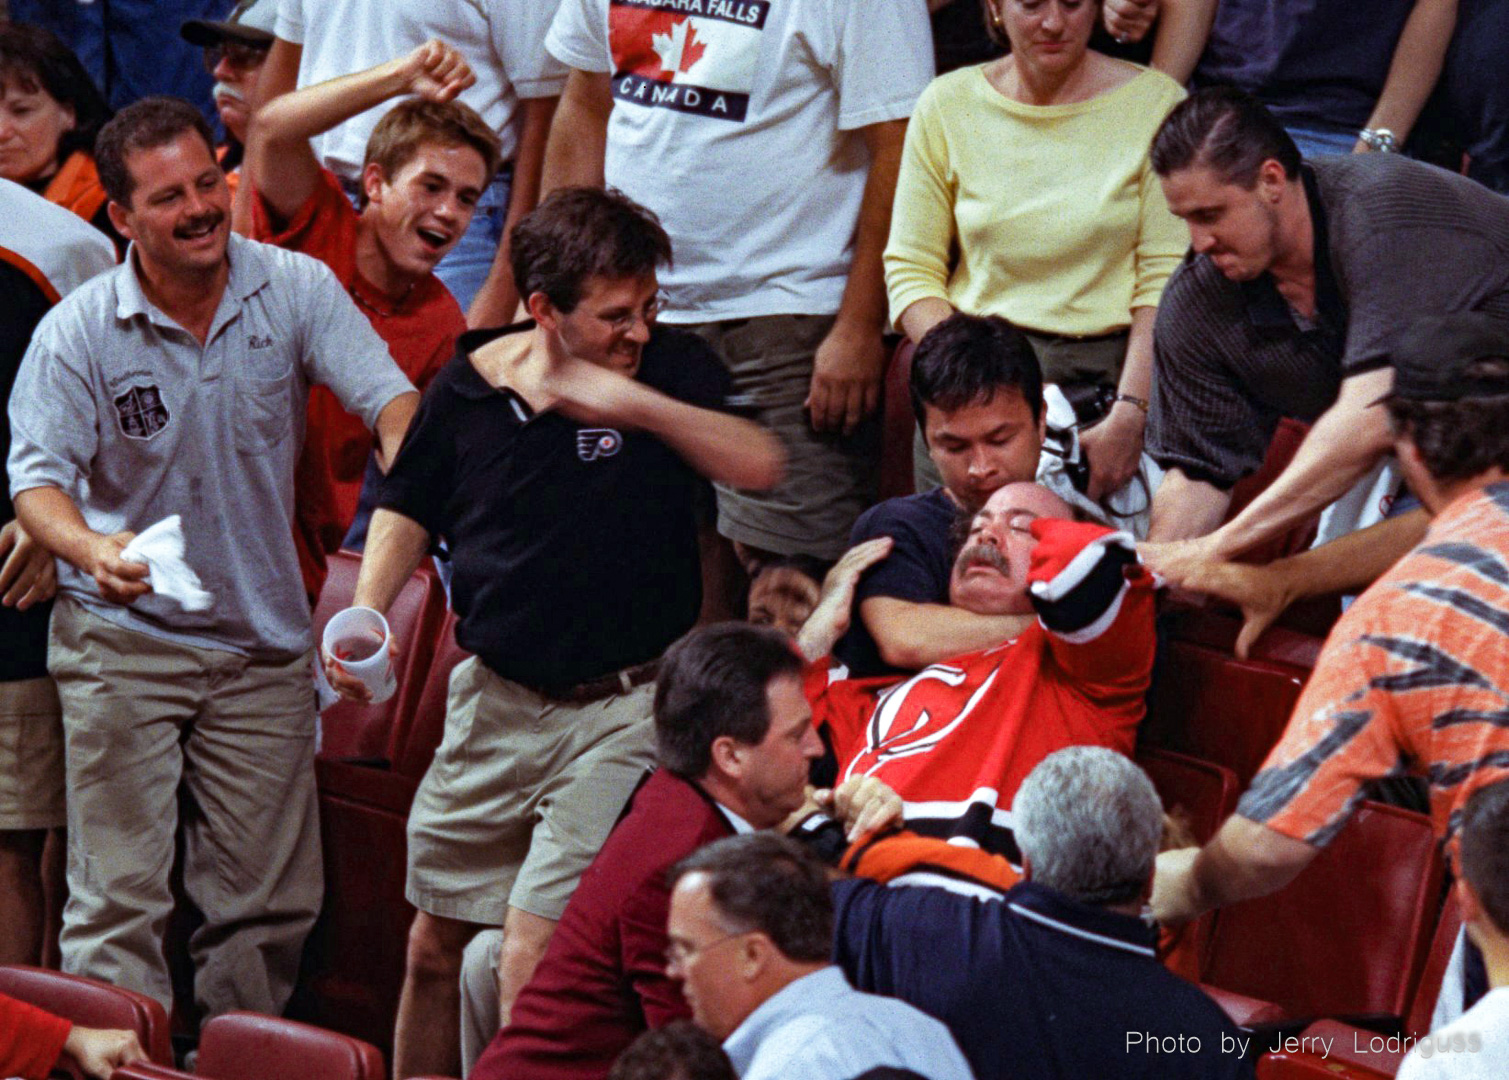 A Devils' fan is choked from behind by a Flyers' fan trying to hold him back as another gets set to backhand him during a fight between rival fans during closing minutes of Flyers 4-1 loss to the Devils in game one of the NHL Eastern Conference Playoff Finals.